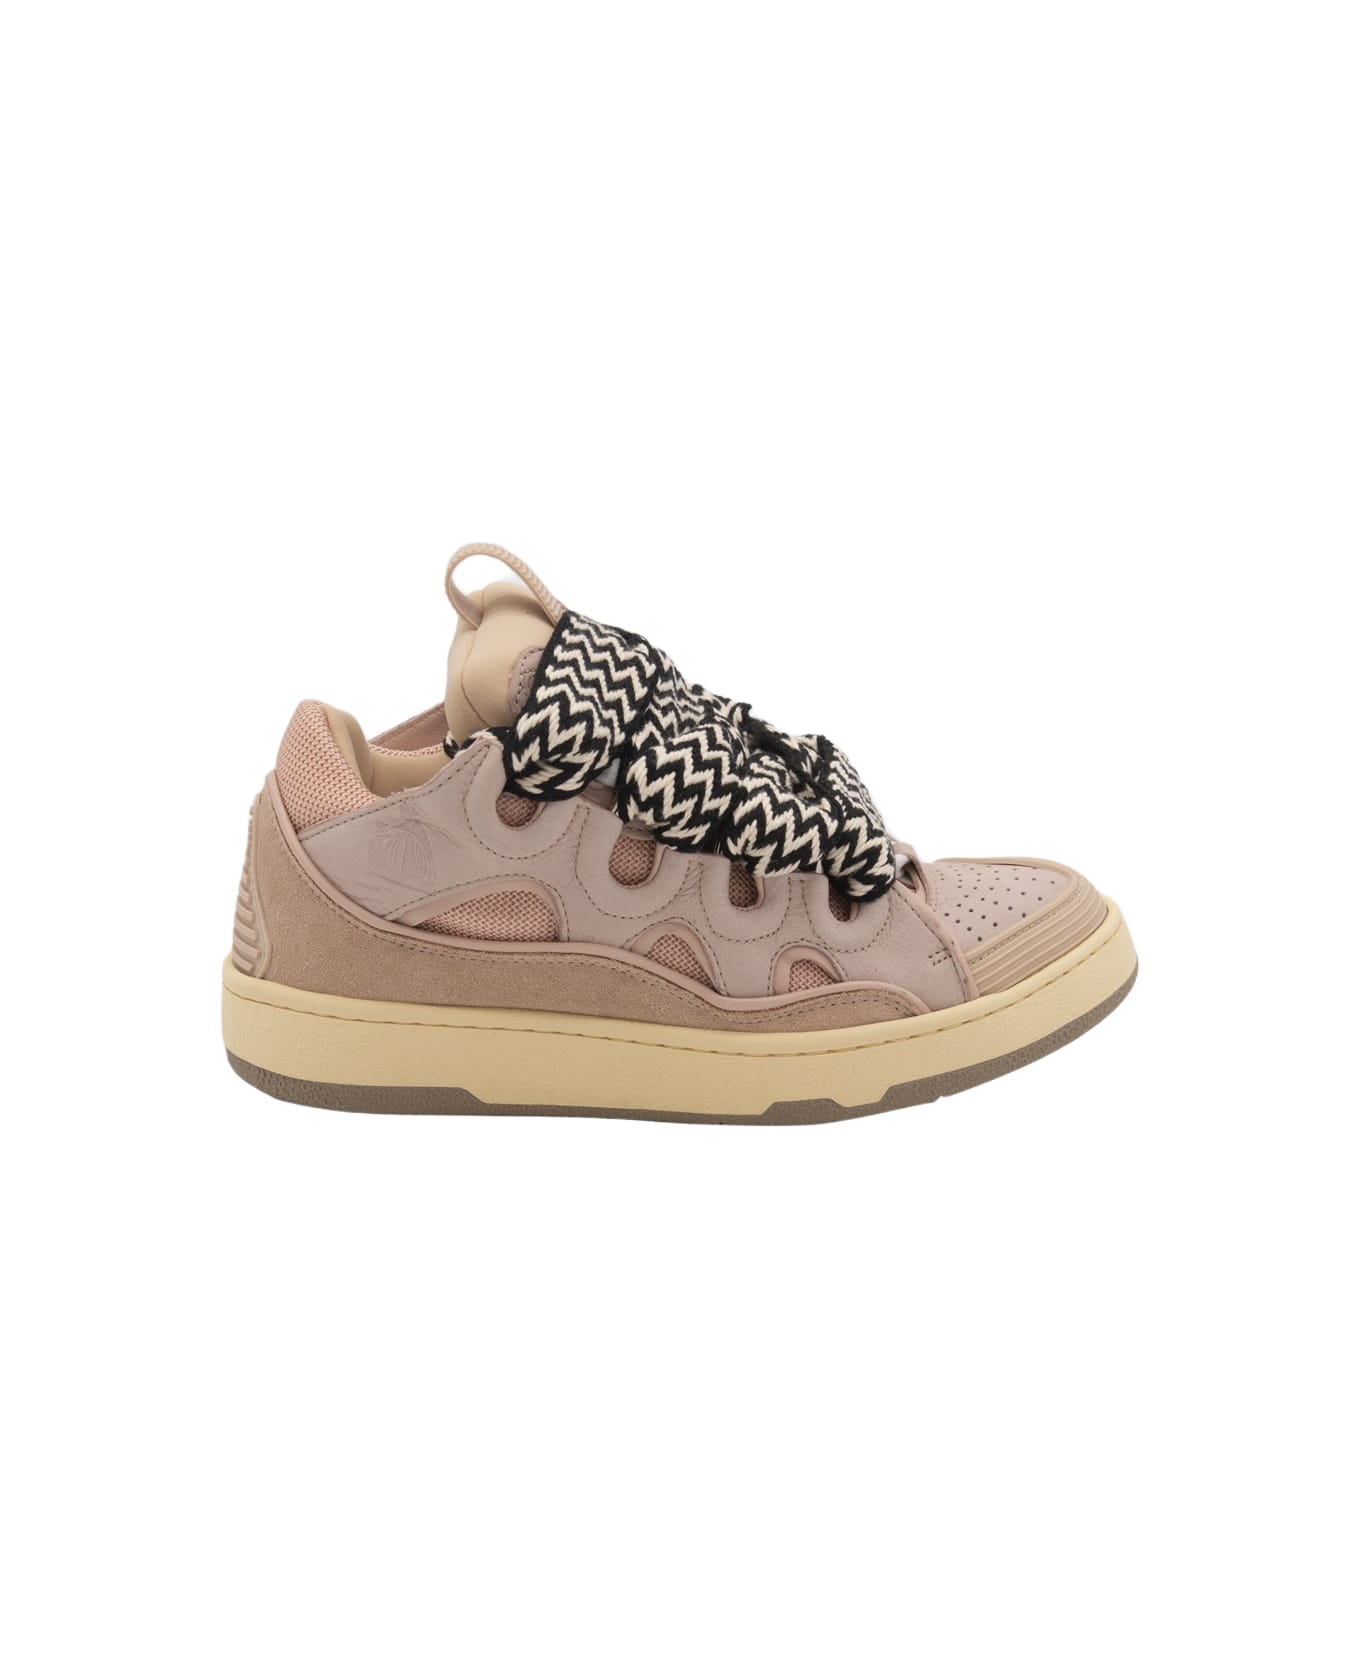 Lanvin Pink Leather Curb Sneakers - PALE PINK スニーカー